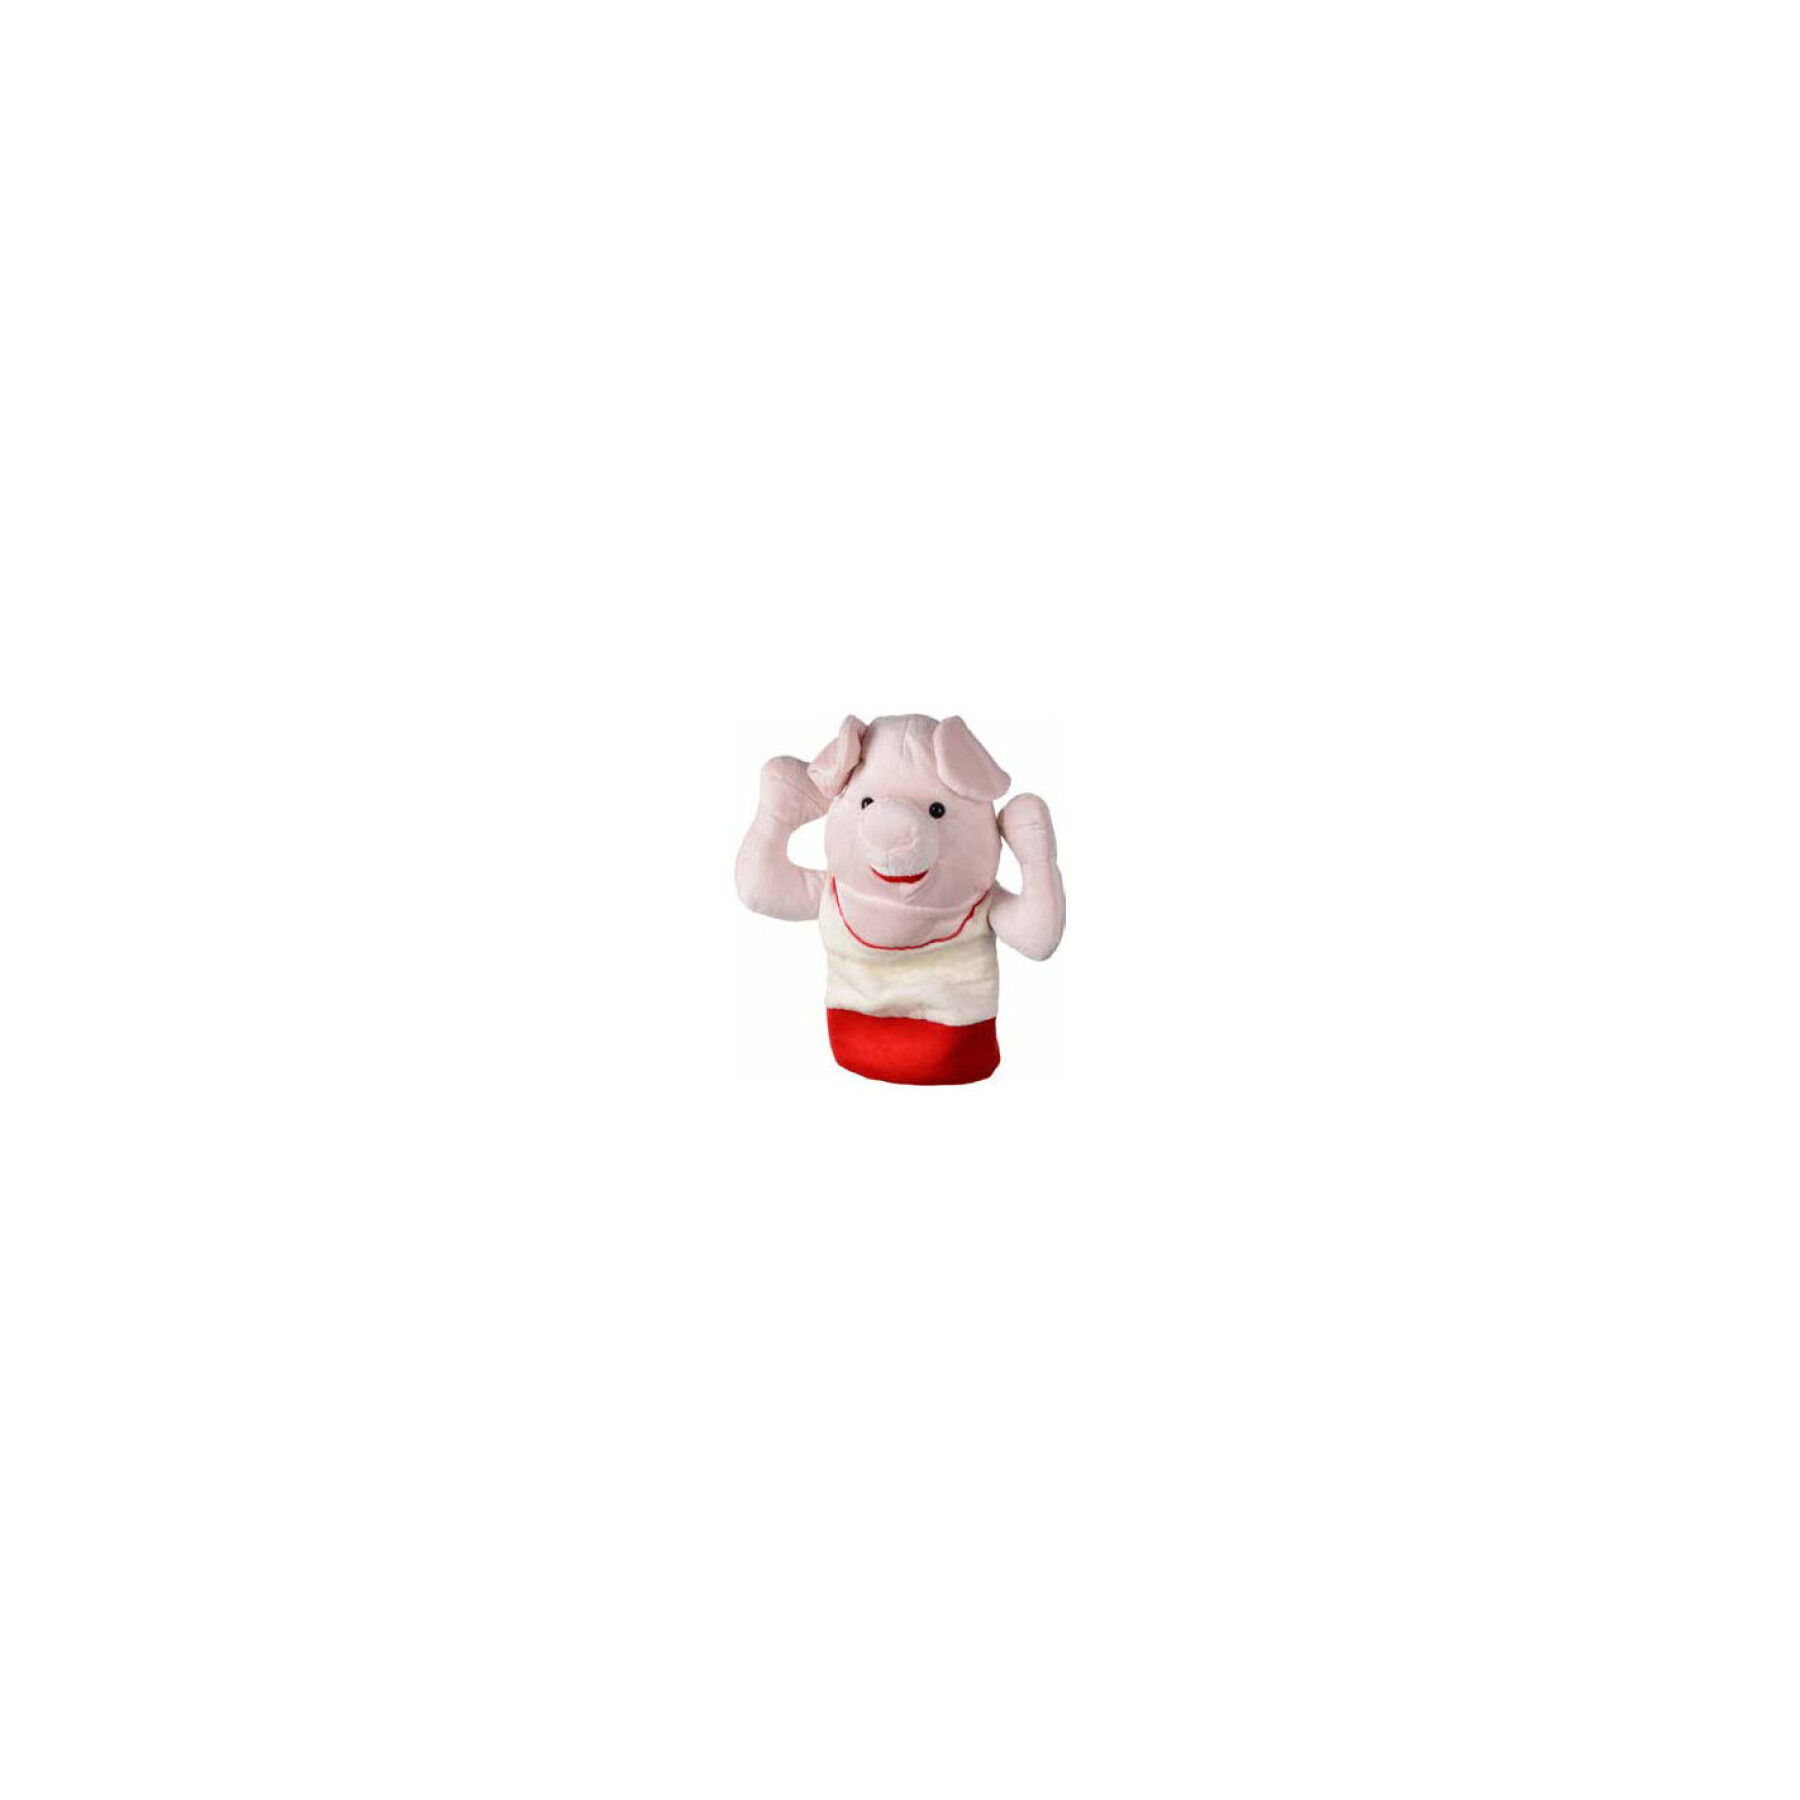 Clube Couvre Legend Pig